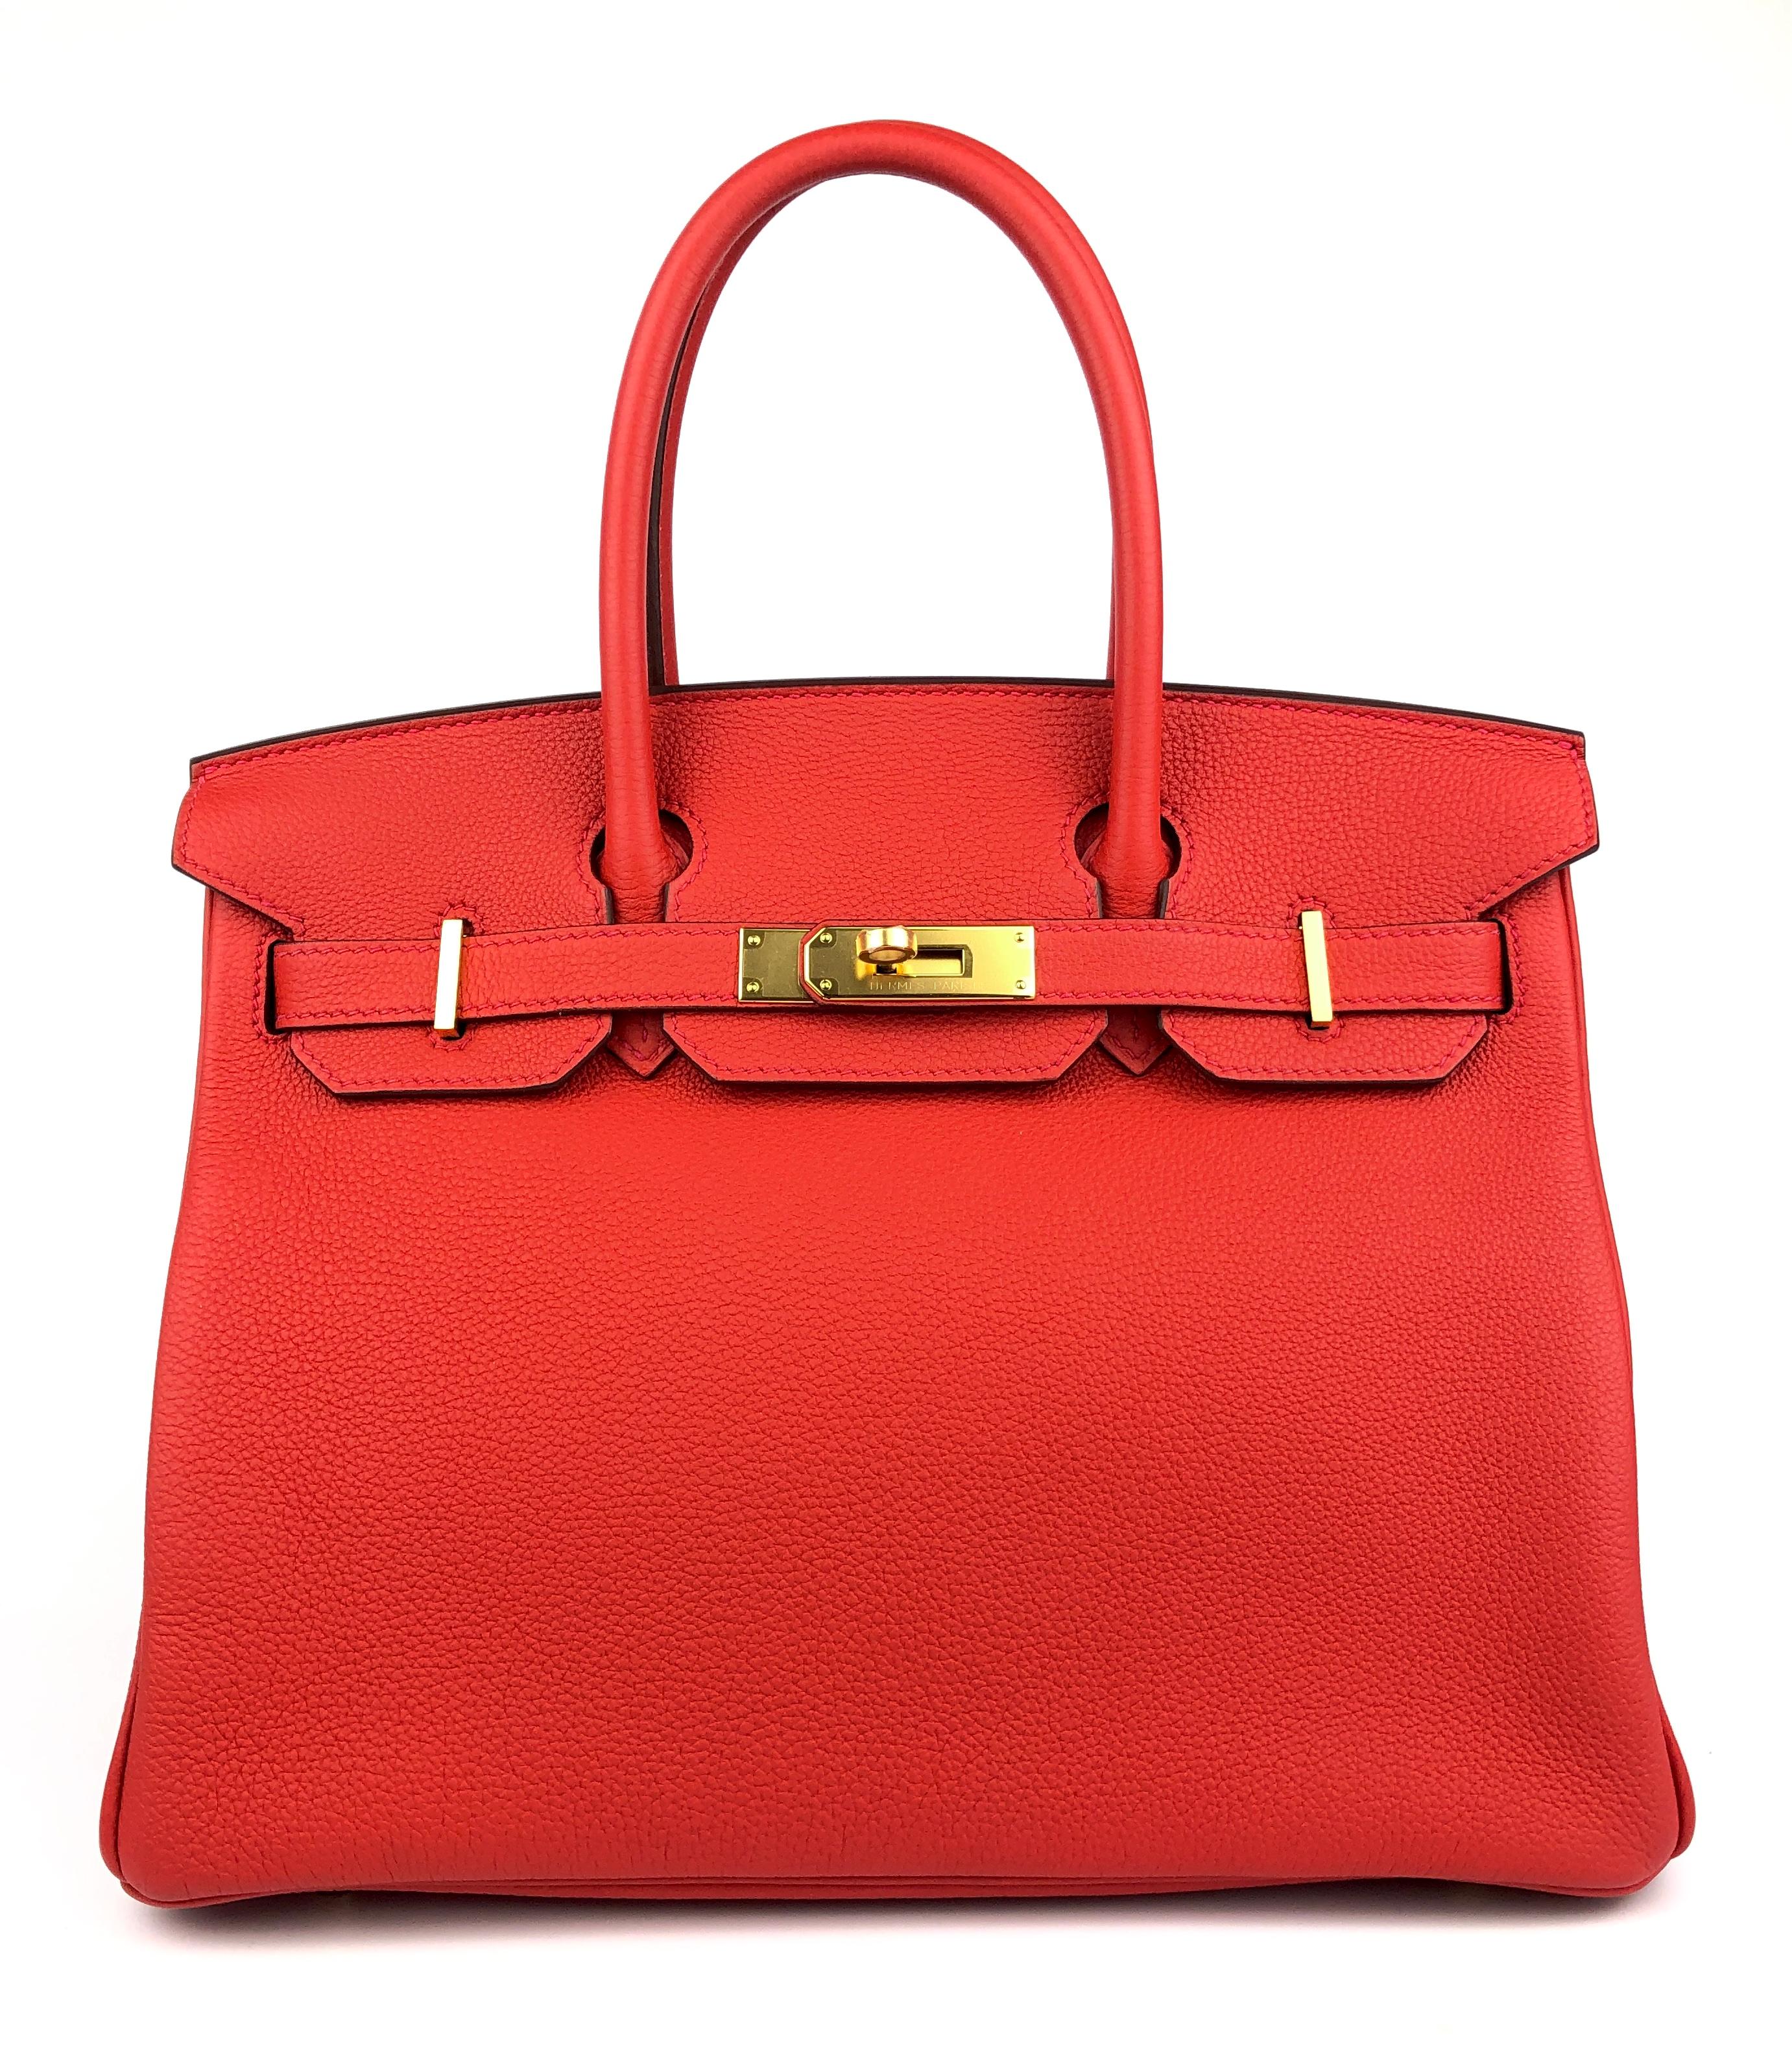 Absolutely beautiful Hermes Birkin 30 Rouge Tomate complimented by Gold Hardware. 2016 X Stamp Like New Condition with all Plastic on Hardware and Feet. 

Shop with Confidence from Lux Addicts. Authenticity Guaranteed! 